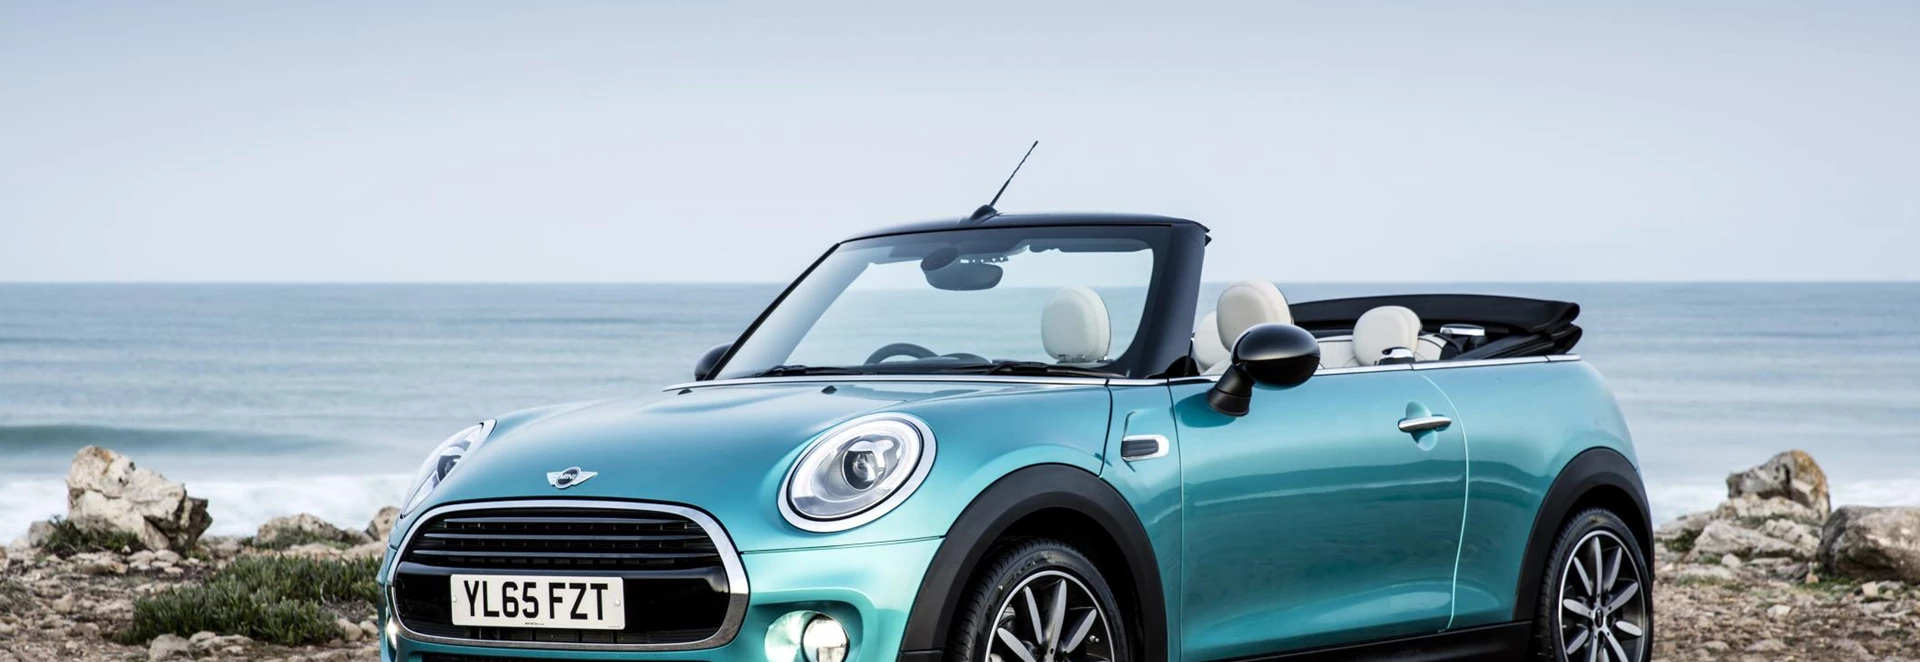 2016 MINI Convertible launches in March